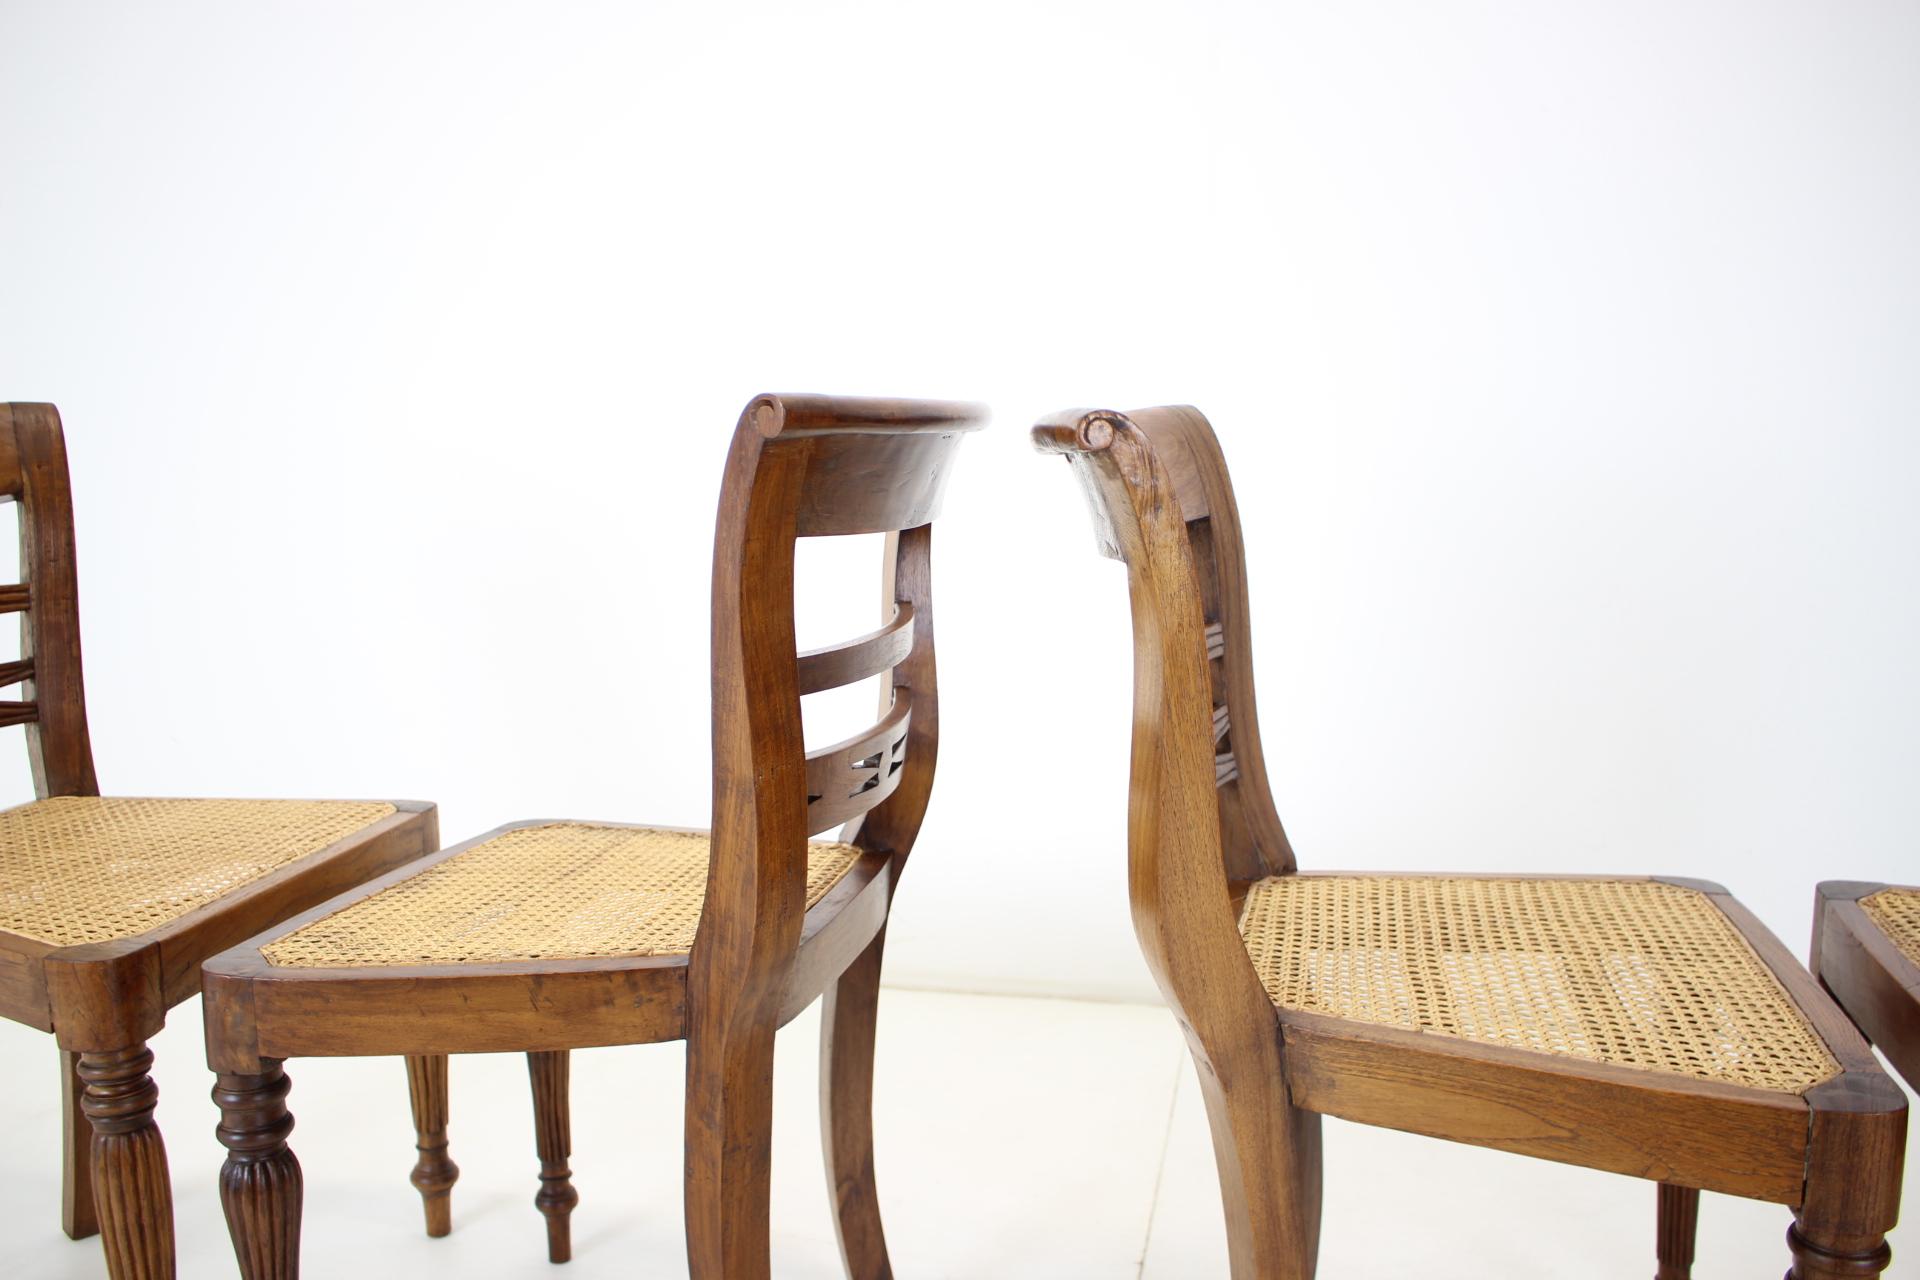 Mid-20th Century Set of Four Dining Chairs, Made of Solid Wood, 1950s, Czechoslovakia For Sale